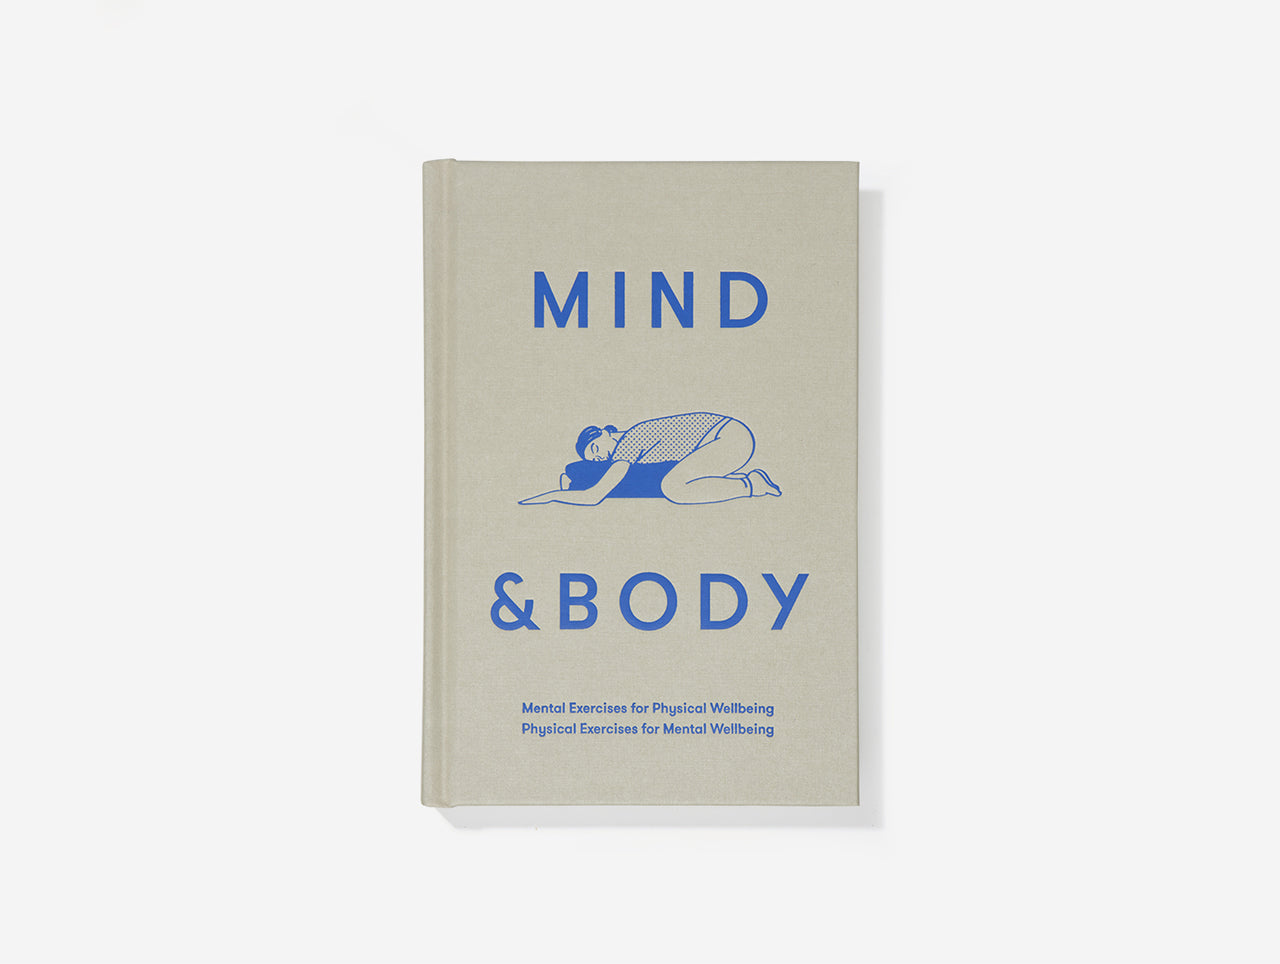 Mind & Body by The School of Life